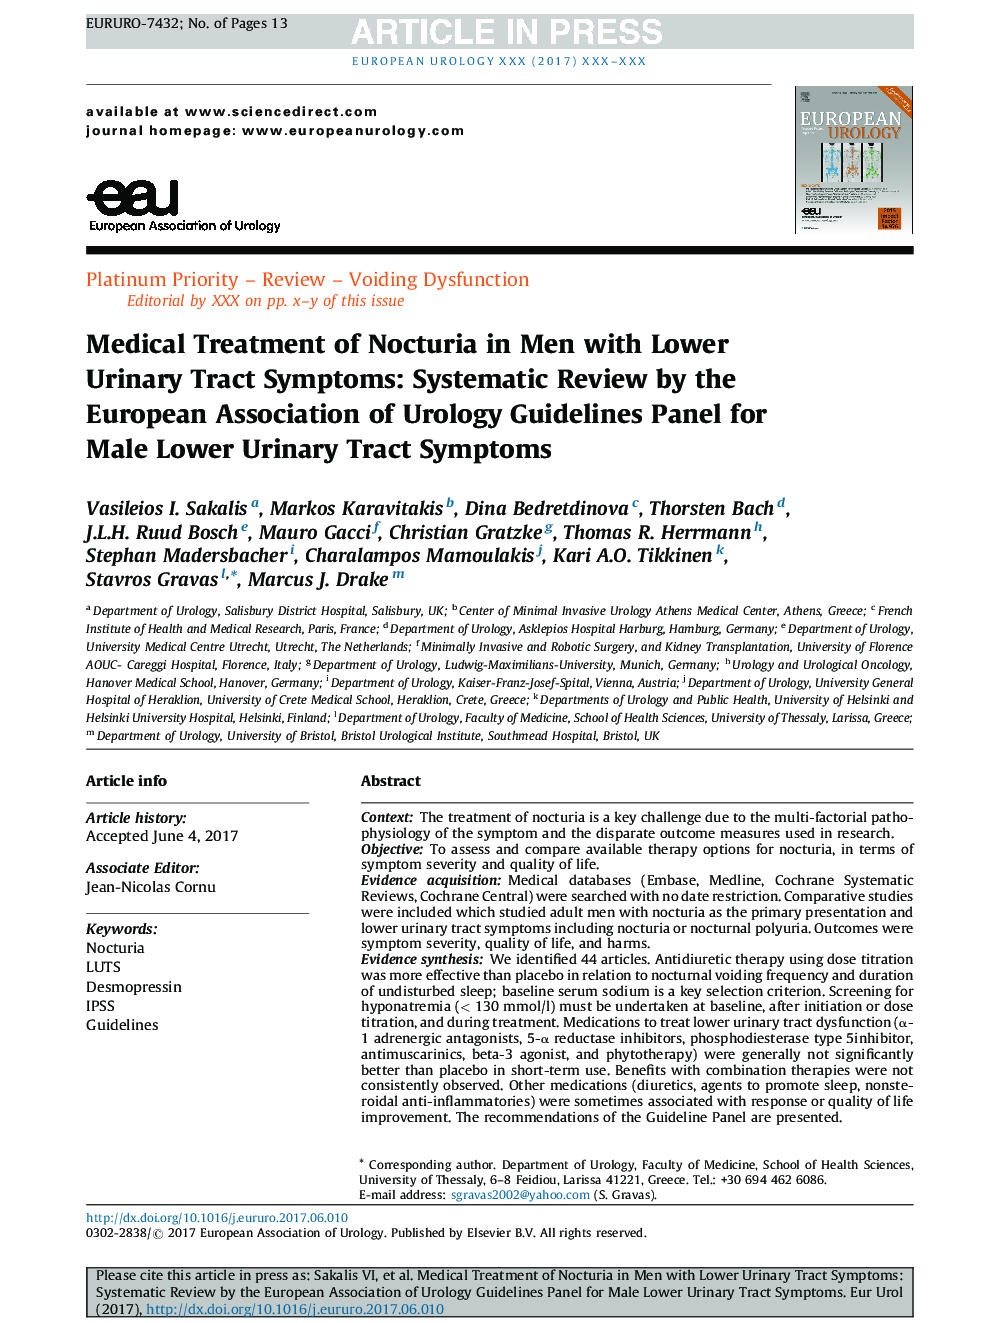 Medical Treatment of Nocturia in Men with Lower Urinary Tract Symptoms: Systematic Review by the European Association of Urology Guidelines Panel for Male Lower Urinary Tract Symptoms